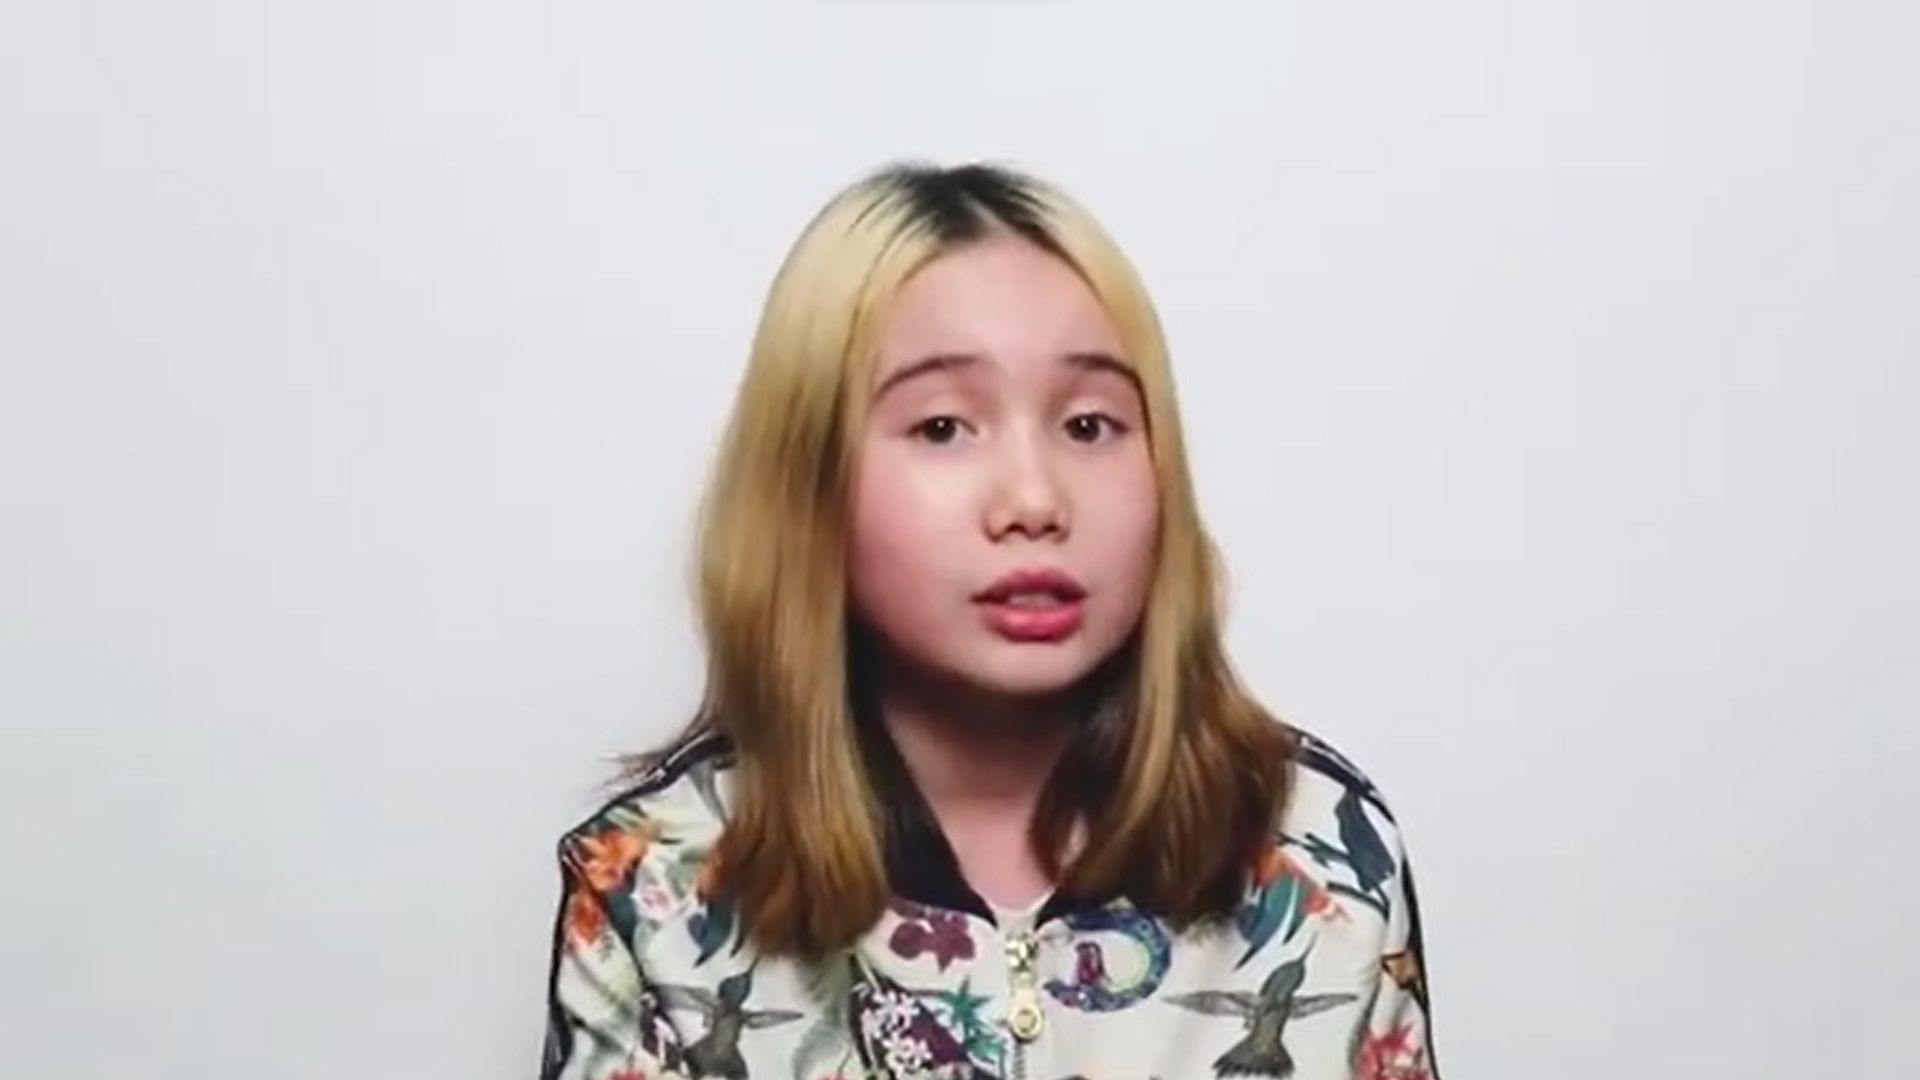 Lil Tay speaks to the camera